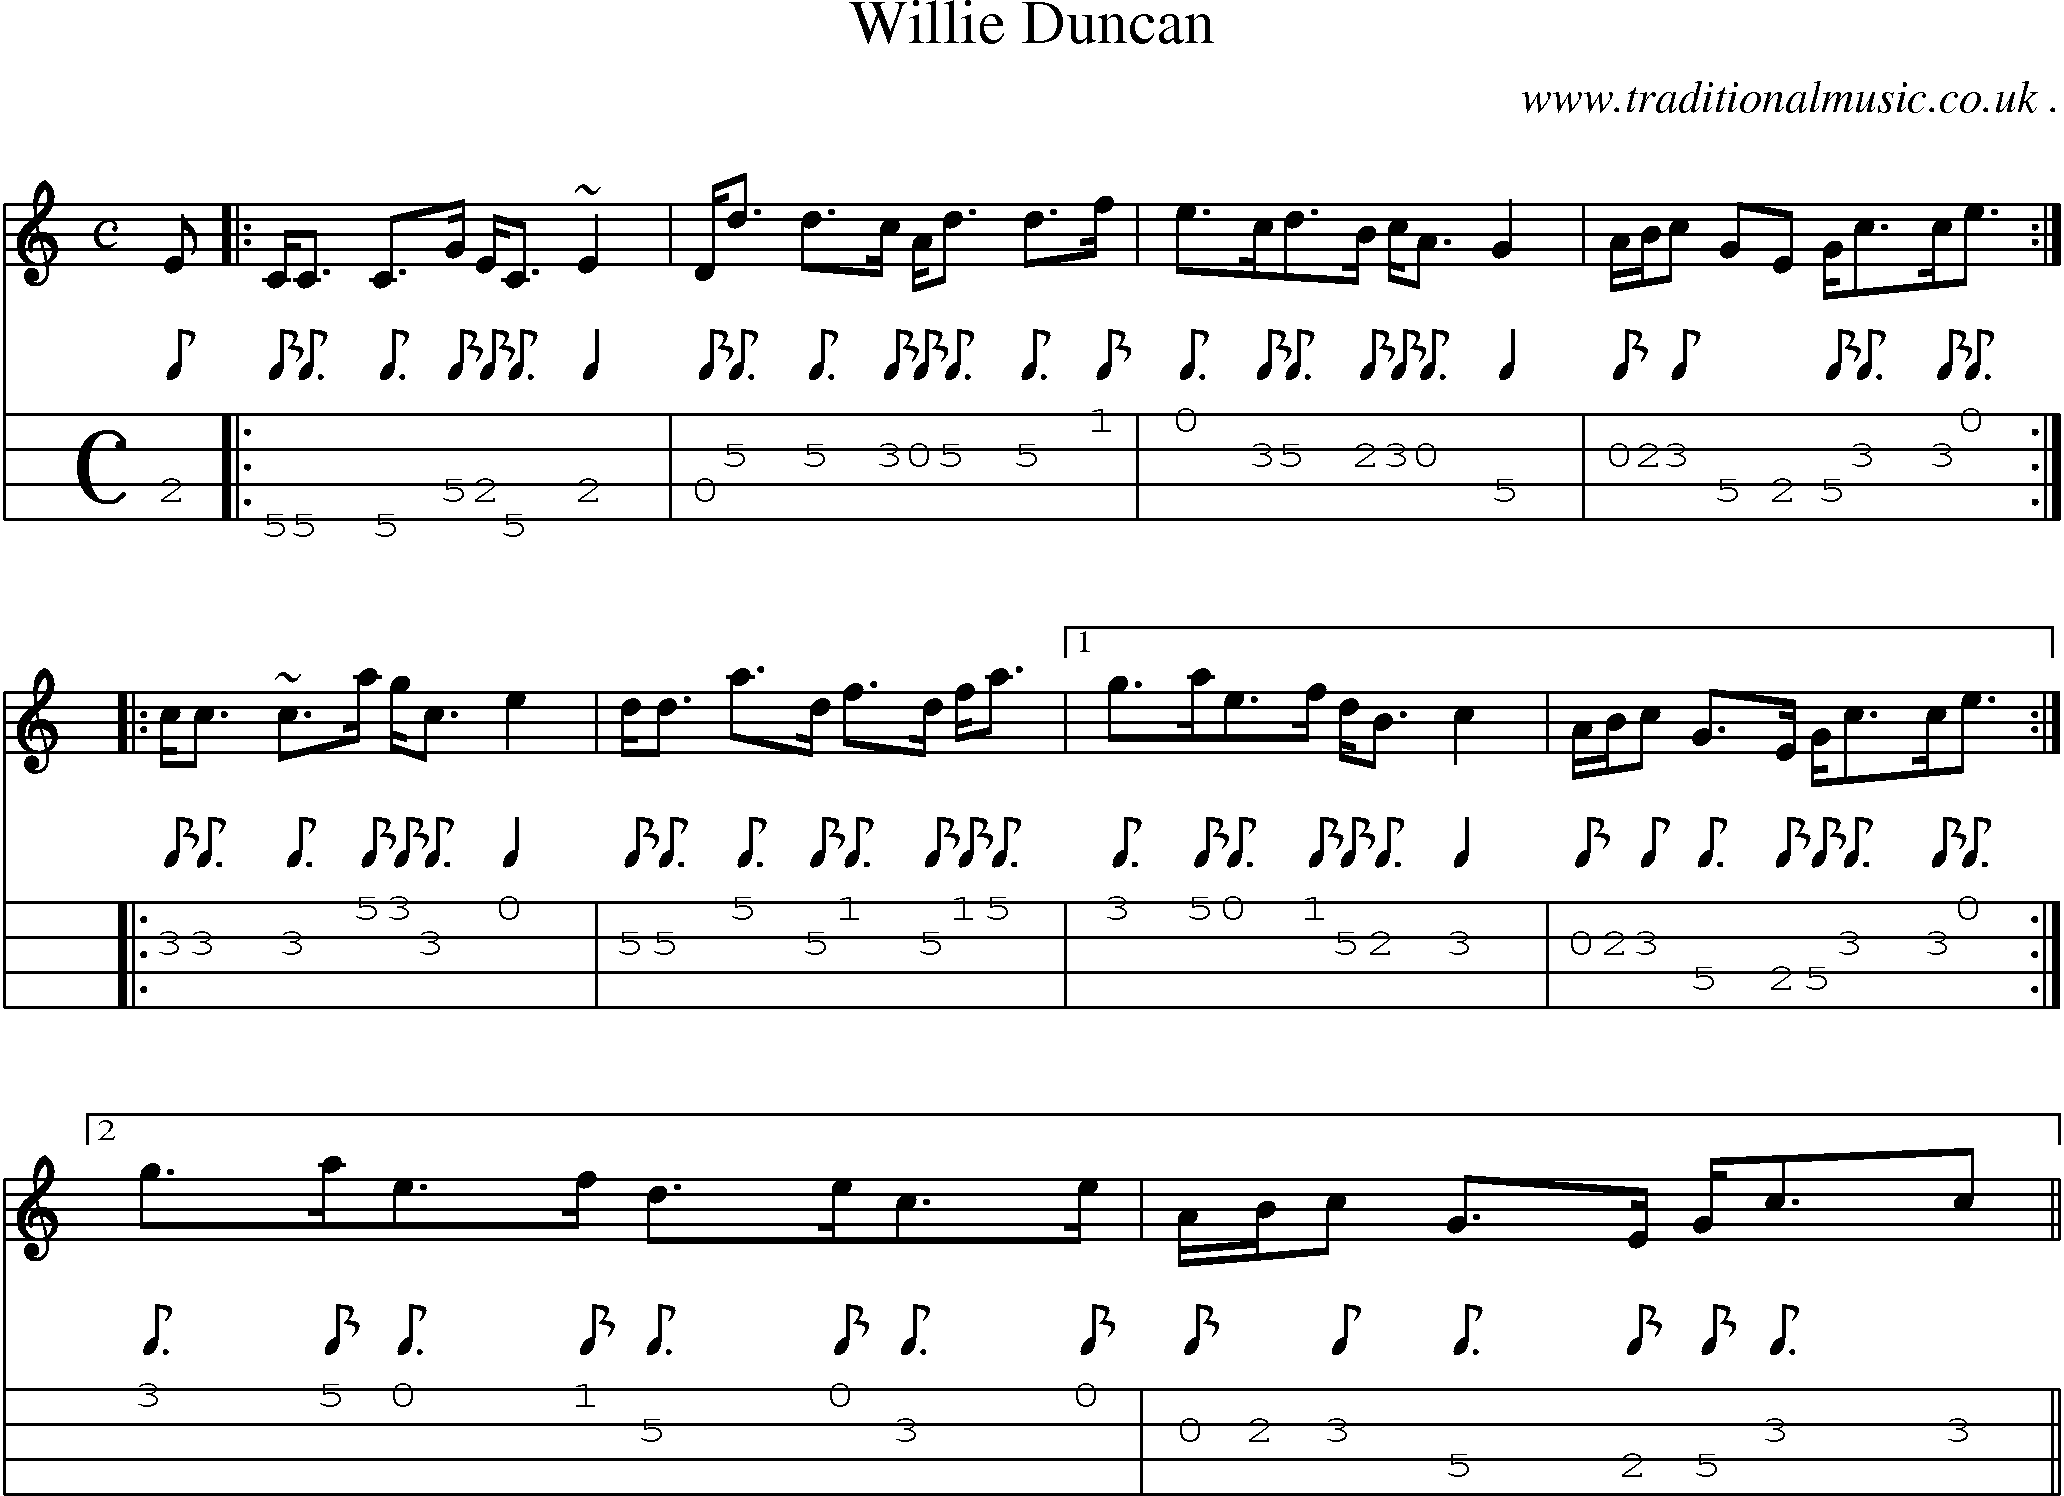 Sheet-music  score, Chords and Mandolin Tabs for Willie Duncan